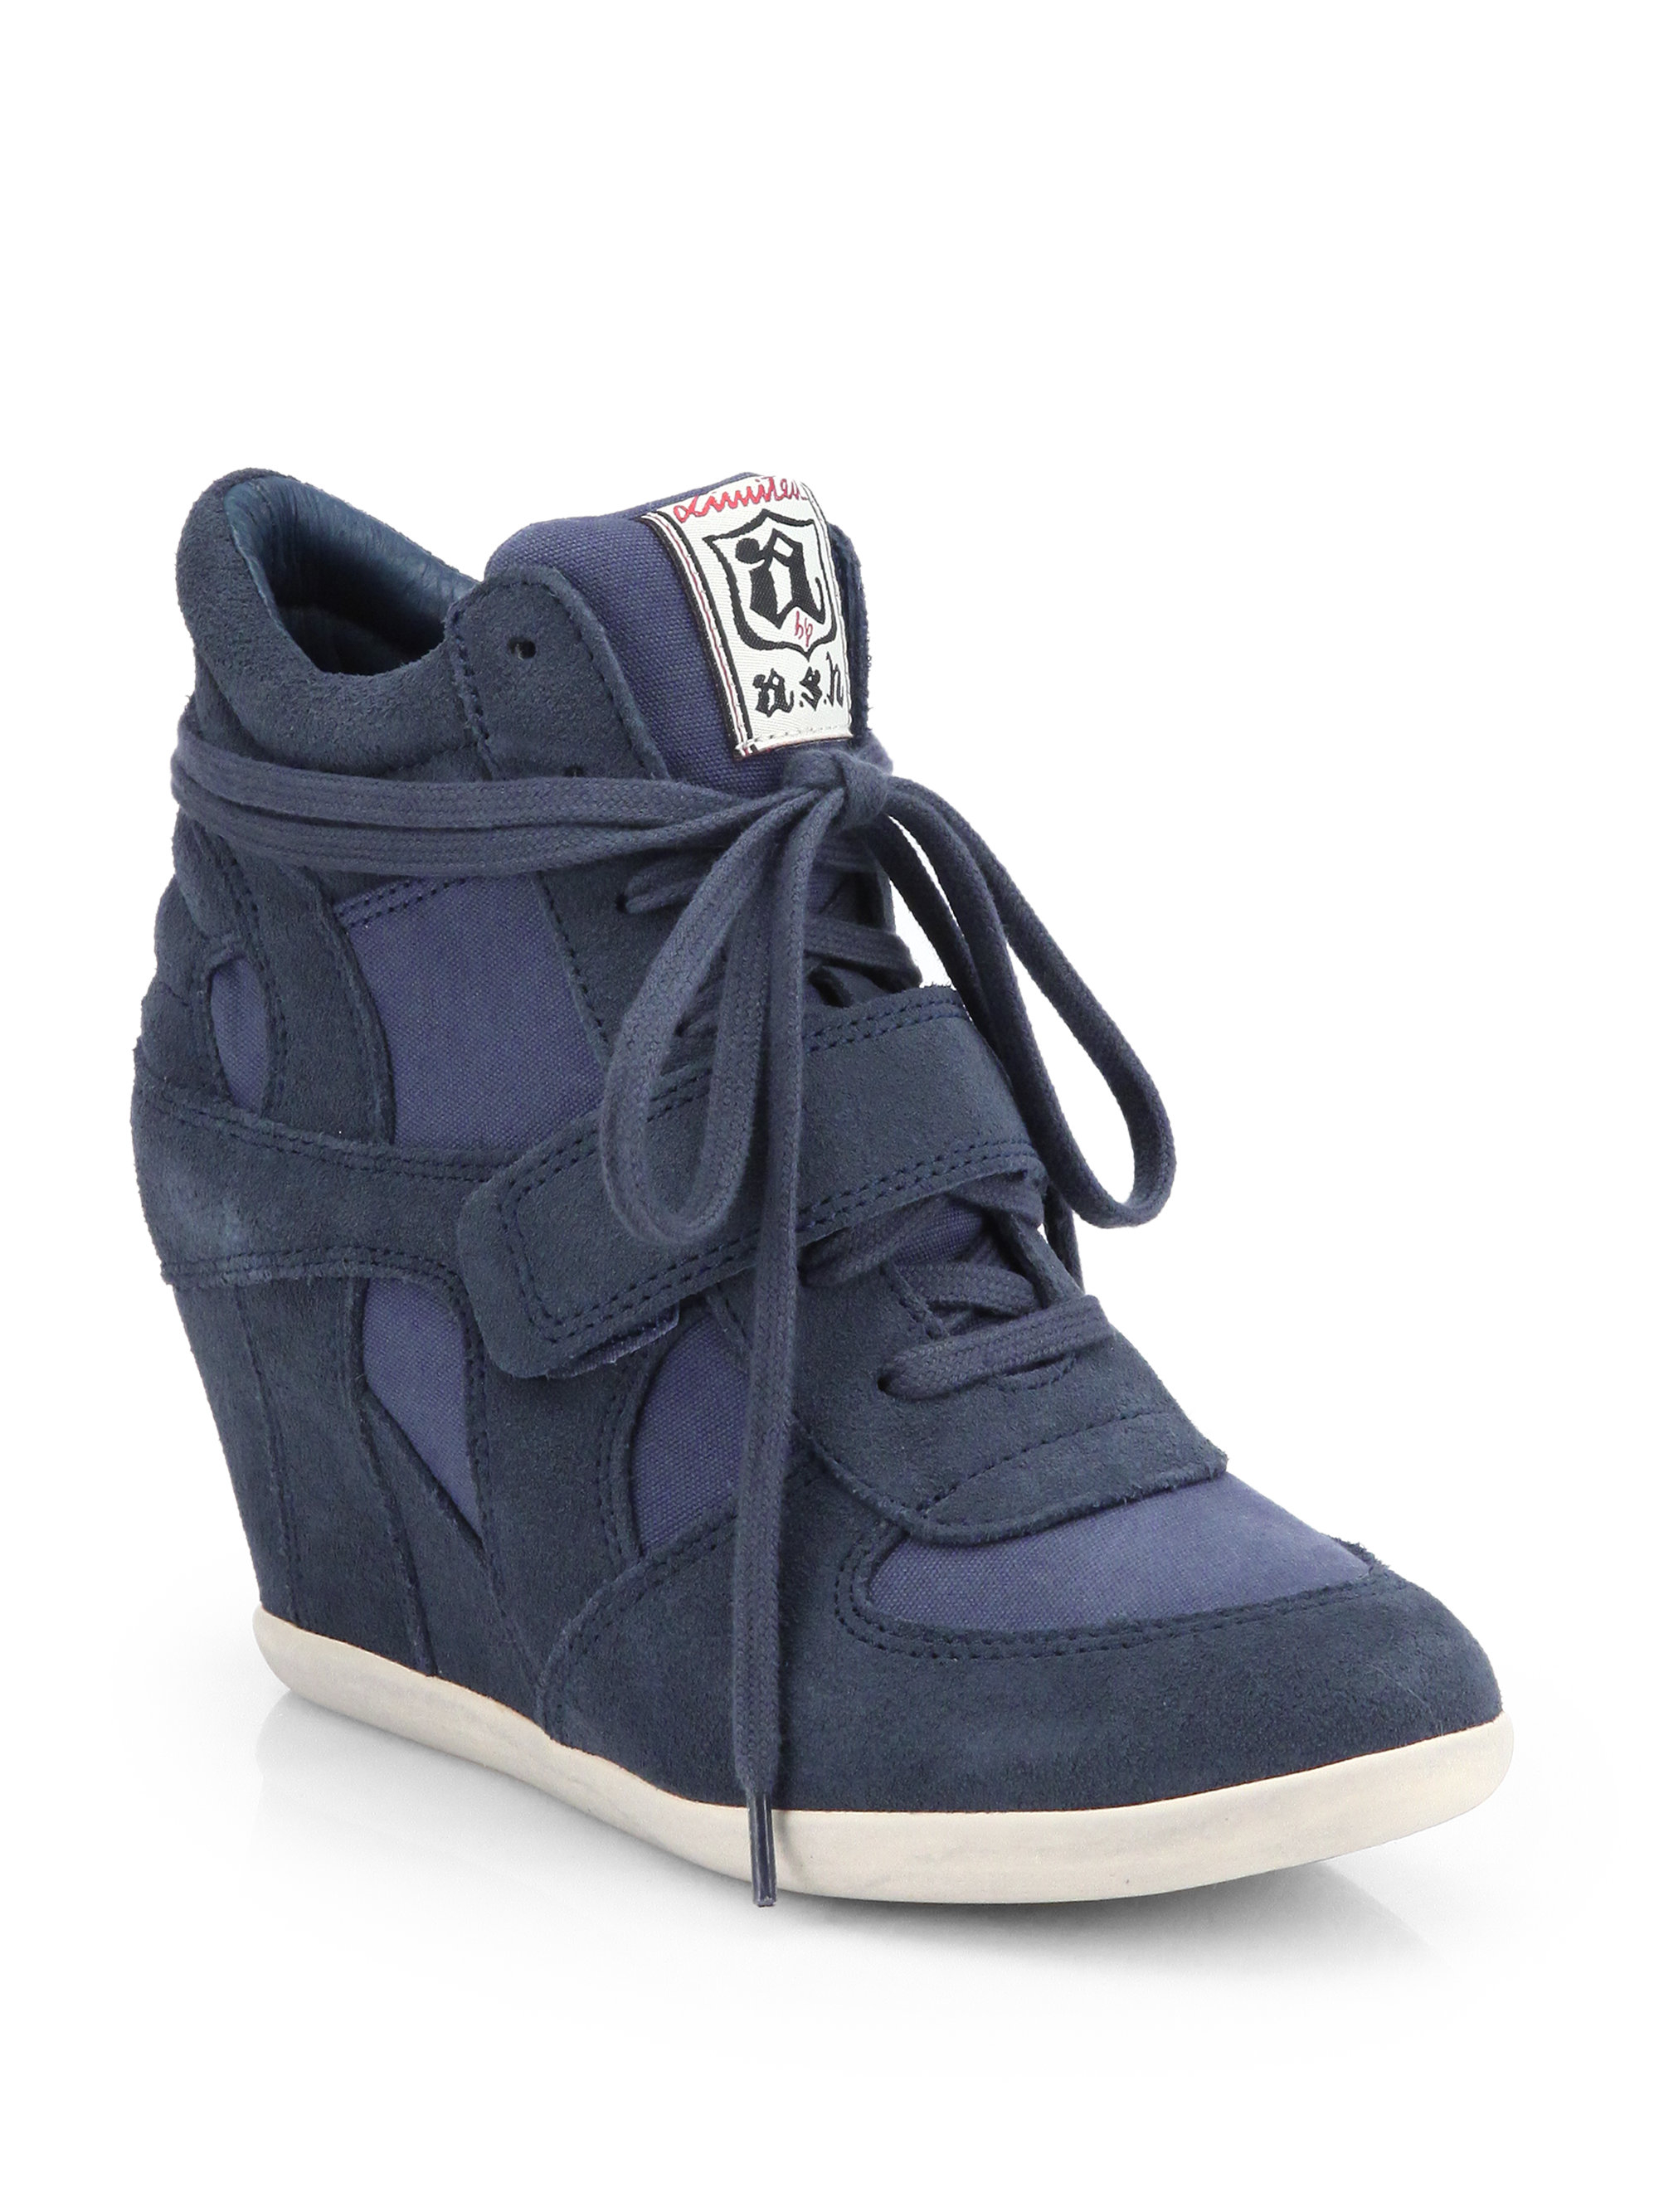 Ash Bowie Suede Canvas Wedge Sneakers in Blue (NAVY) | Lyst